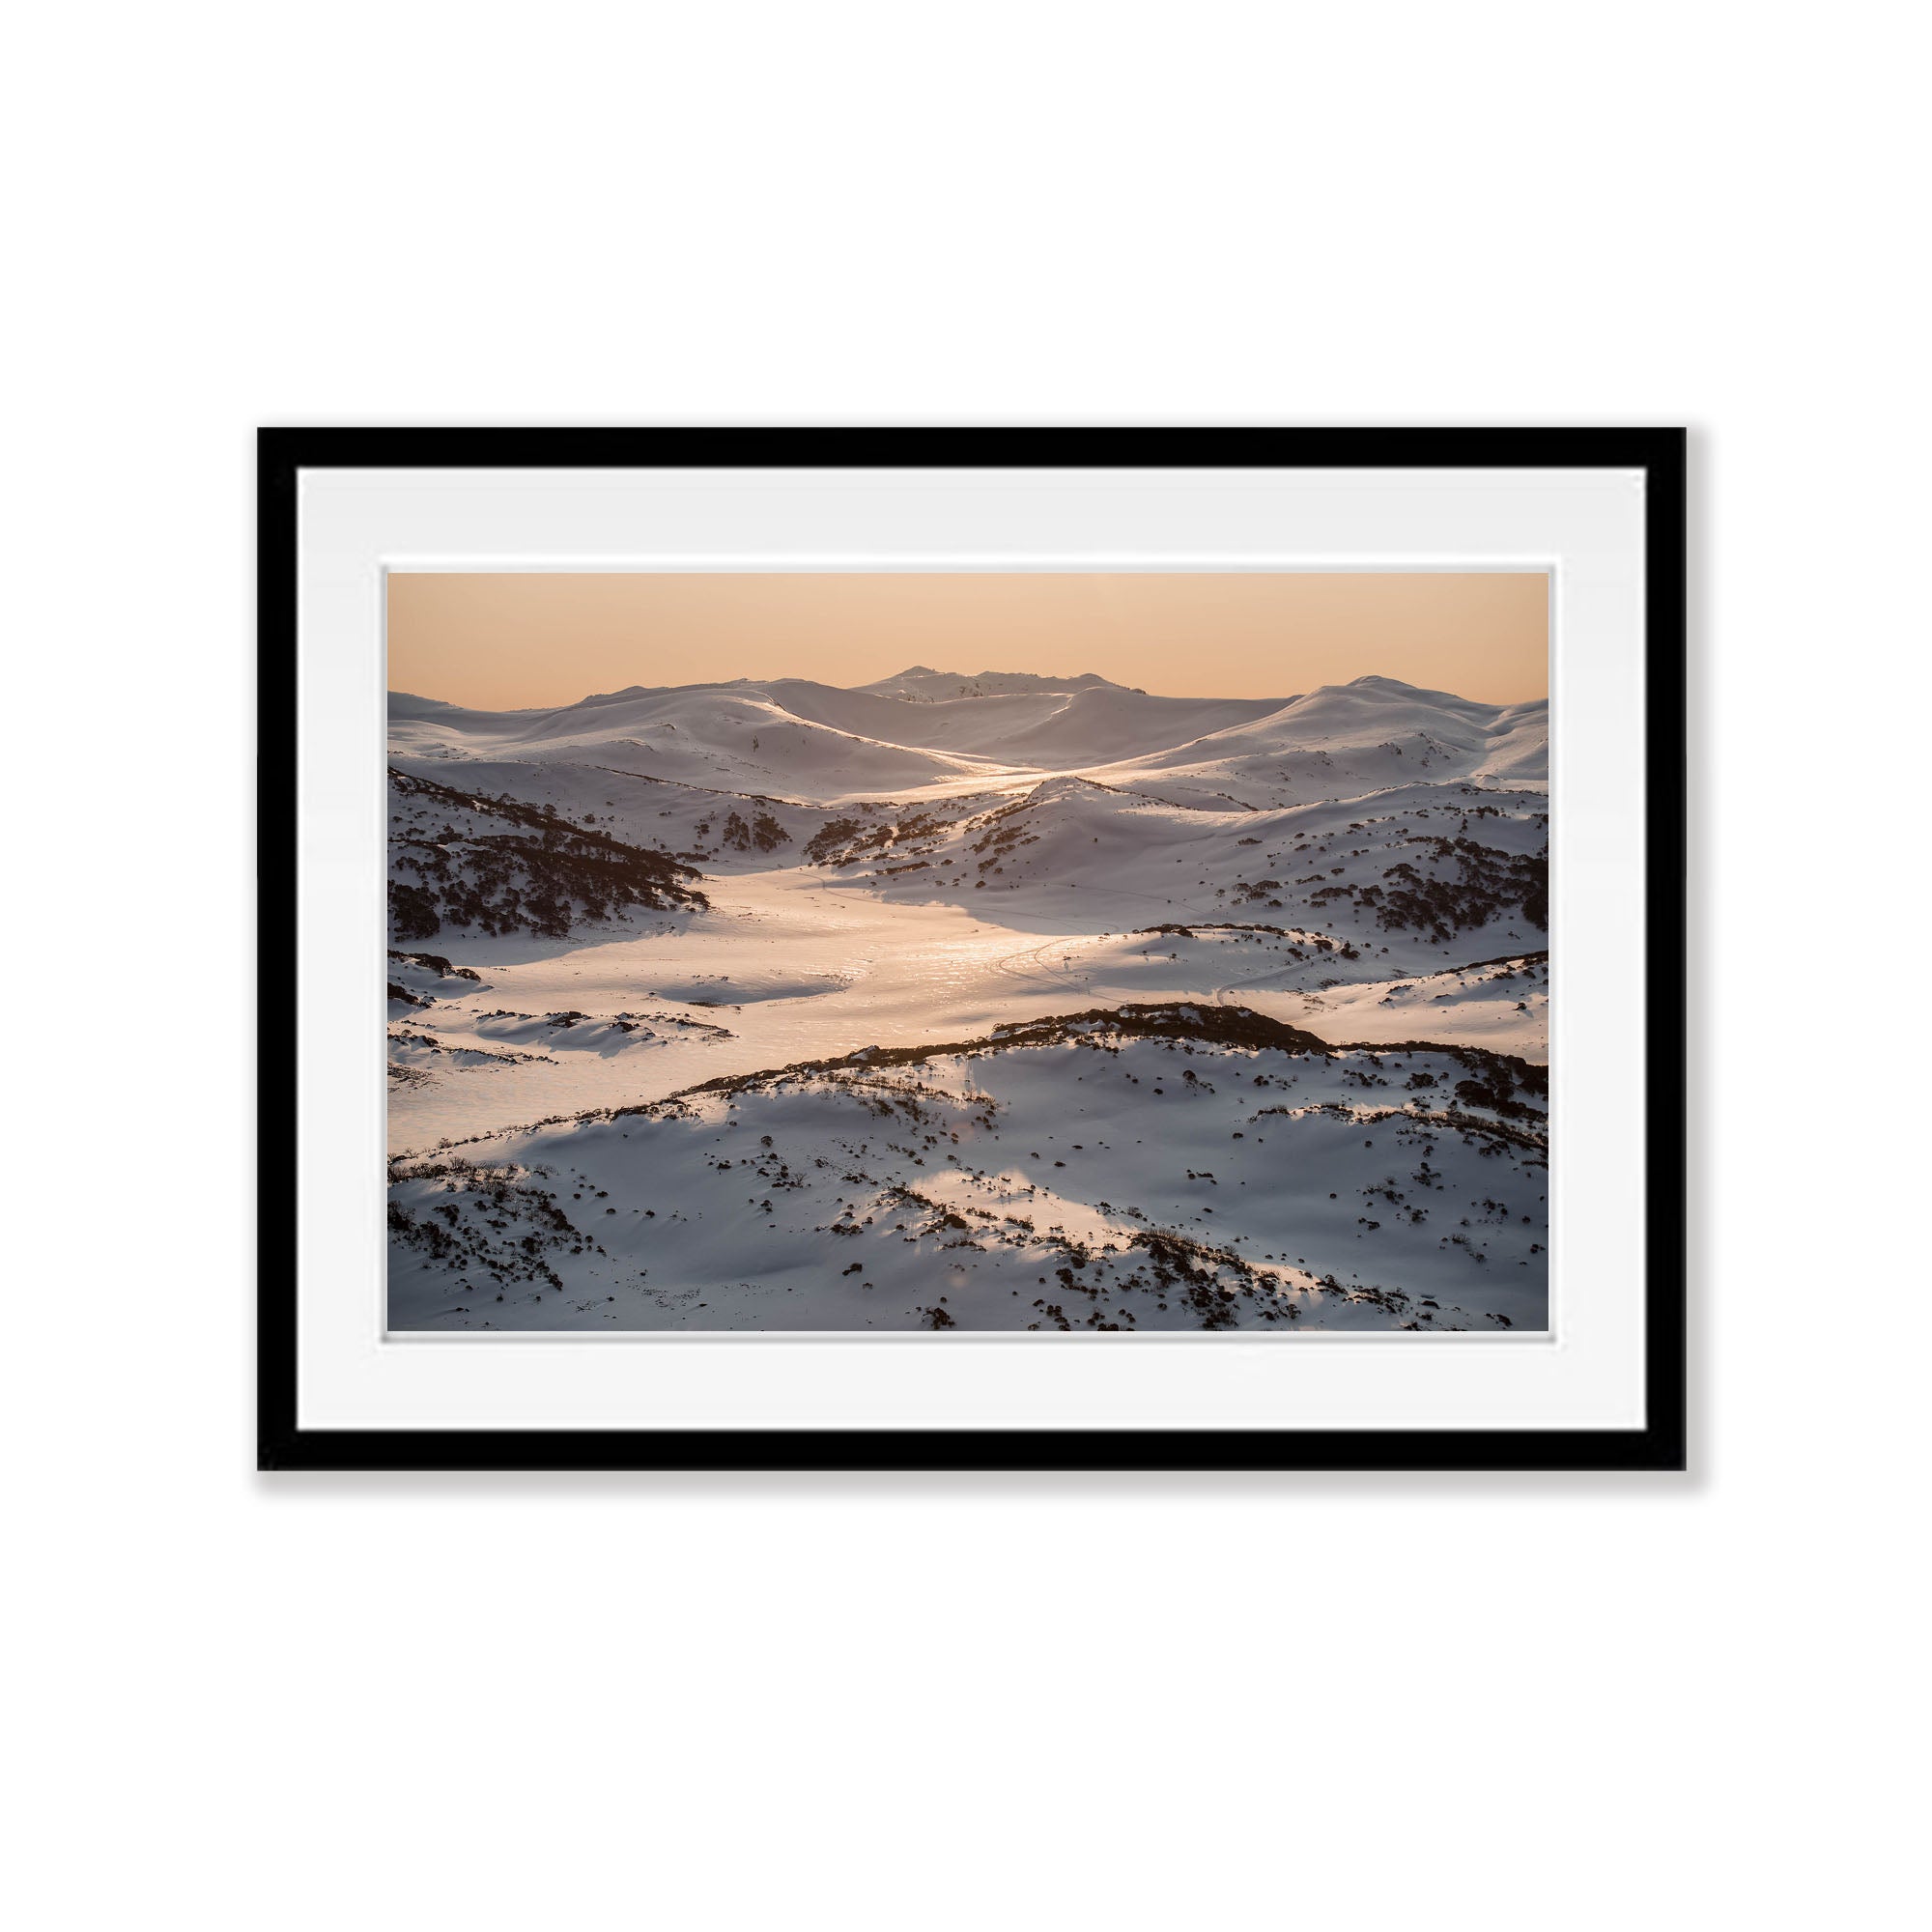 Late Afternoon Light over the Snowy Mountains, New South Wales